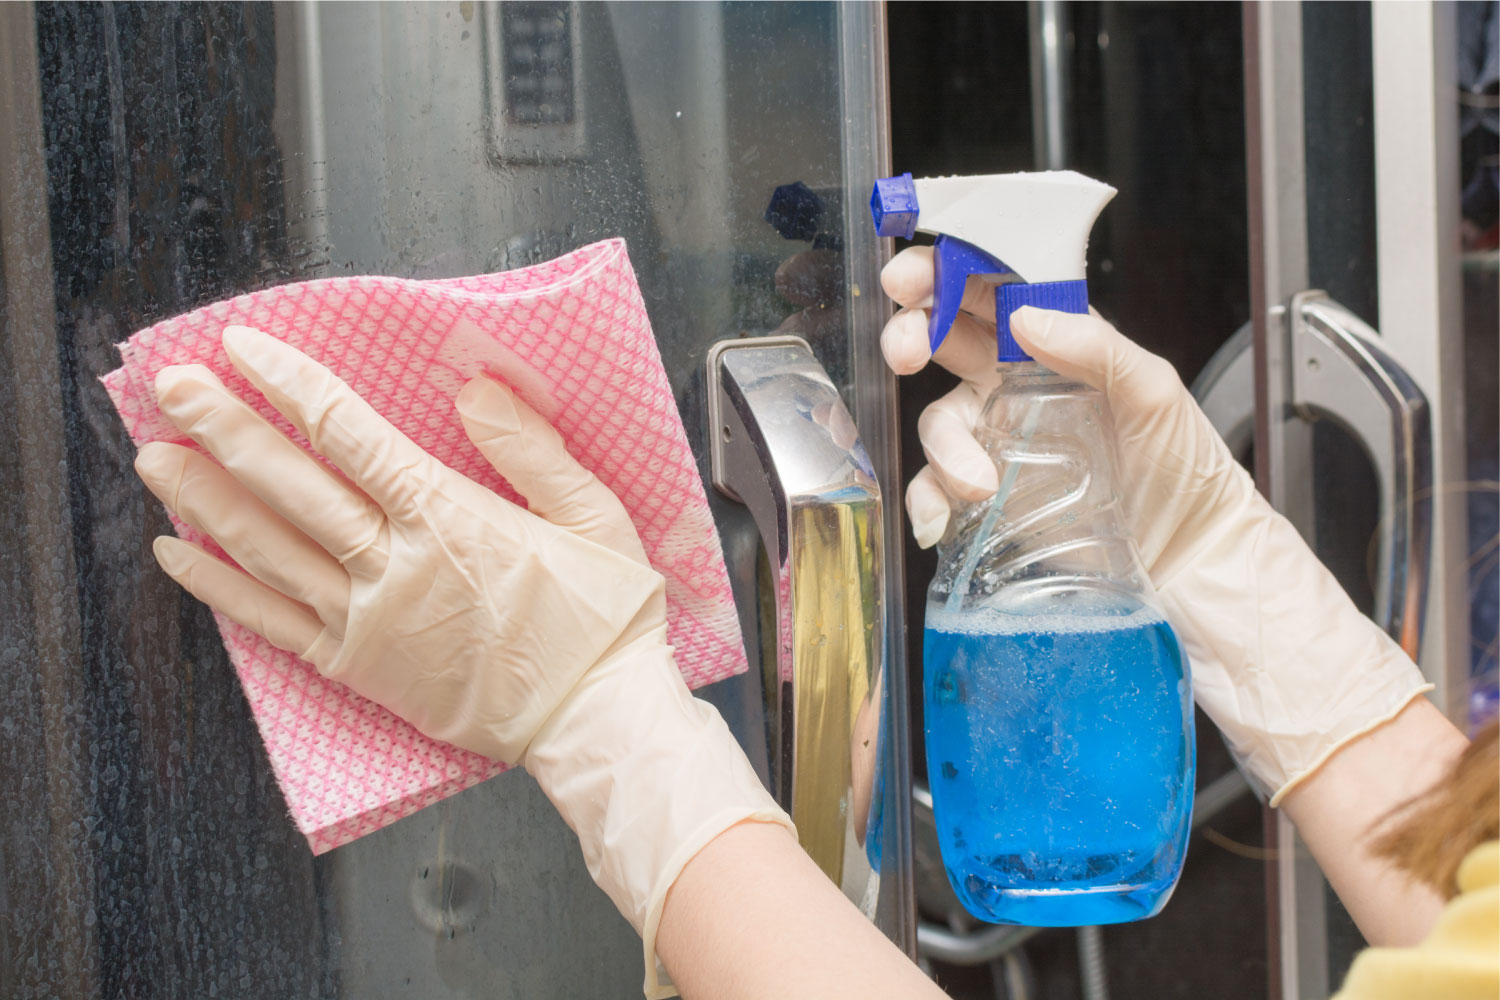 a close up of gloved hands holding a cloth and cleaning spray while cleaning a shower screen